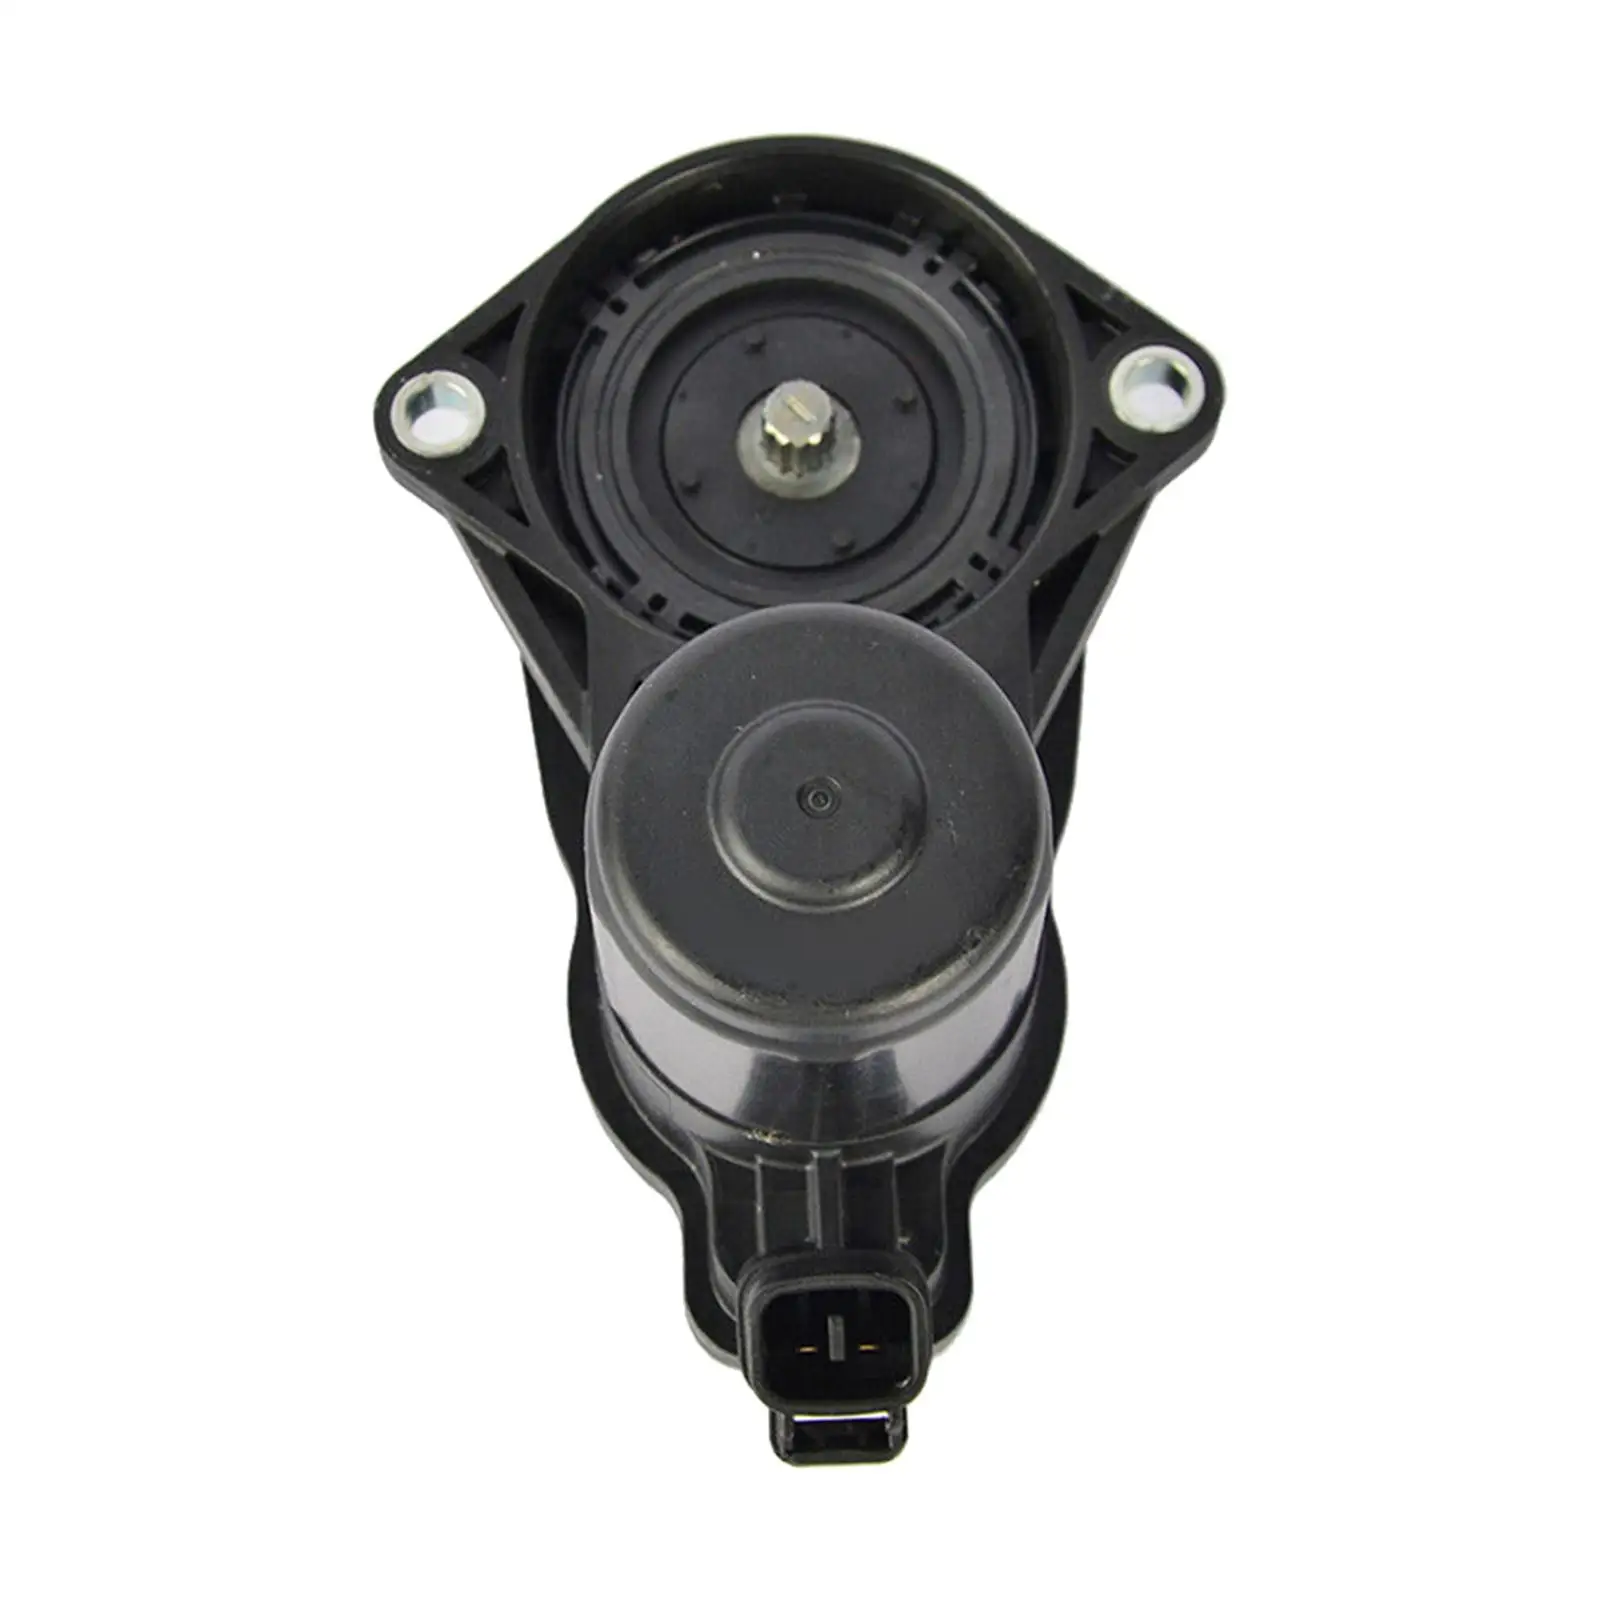 Parking Brake Actuator Replaces Automotive Replacement Part for Toyota Corolla Sedan for camry Venza Corolla Hatchback